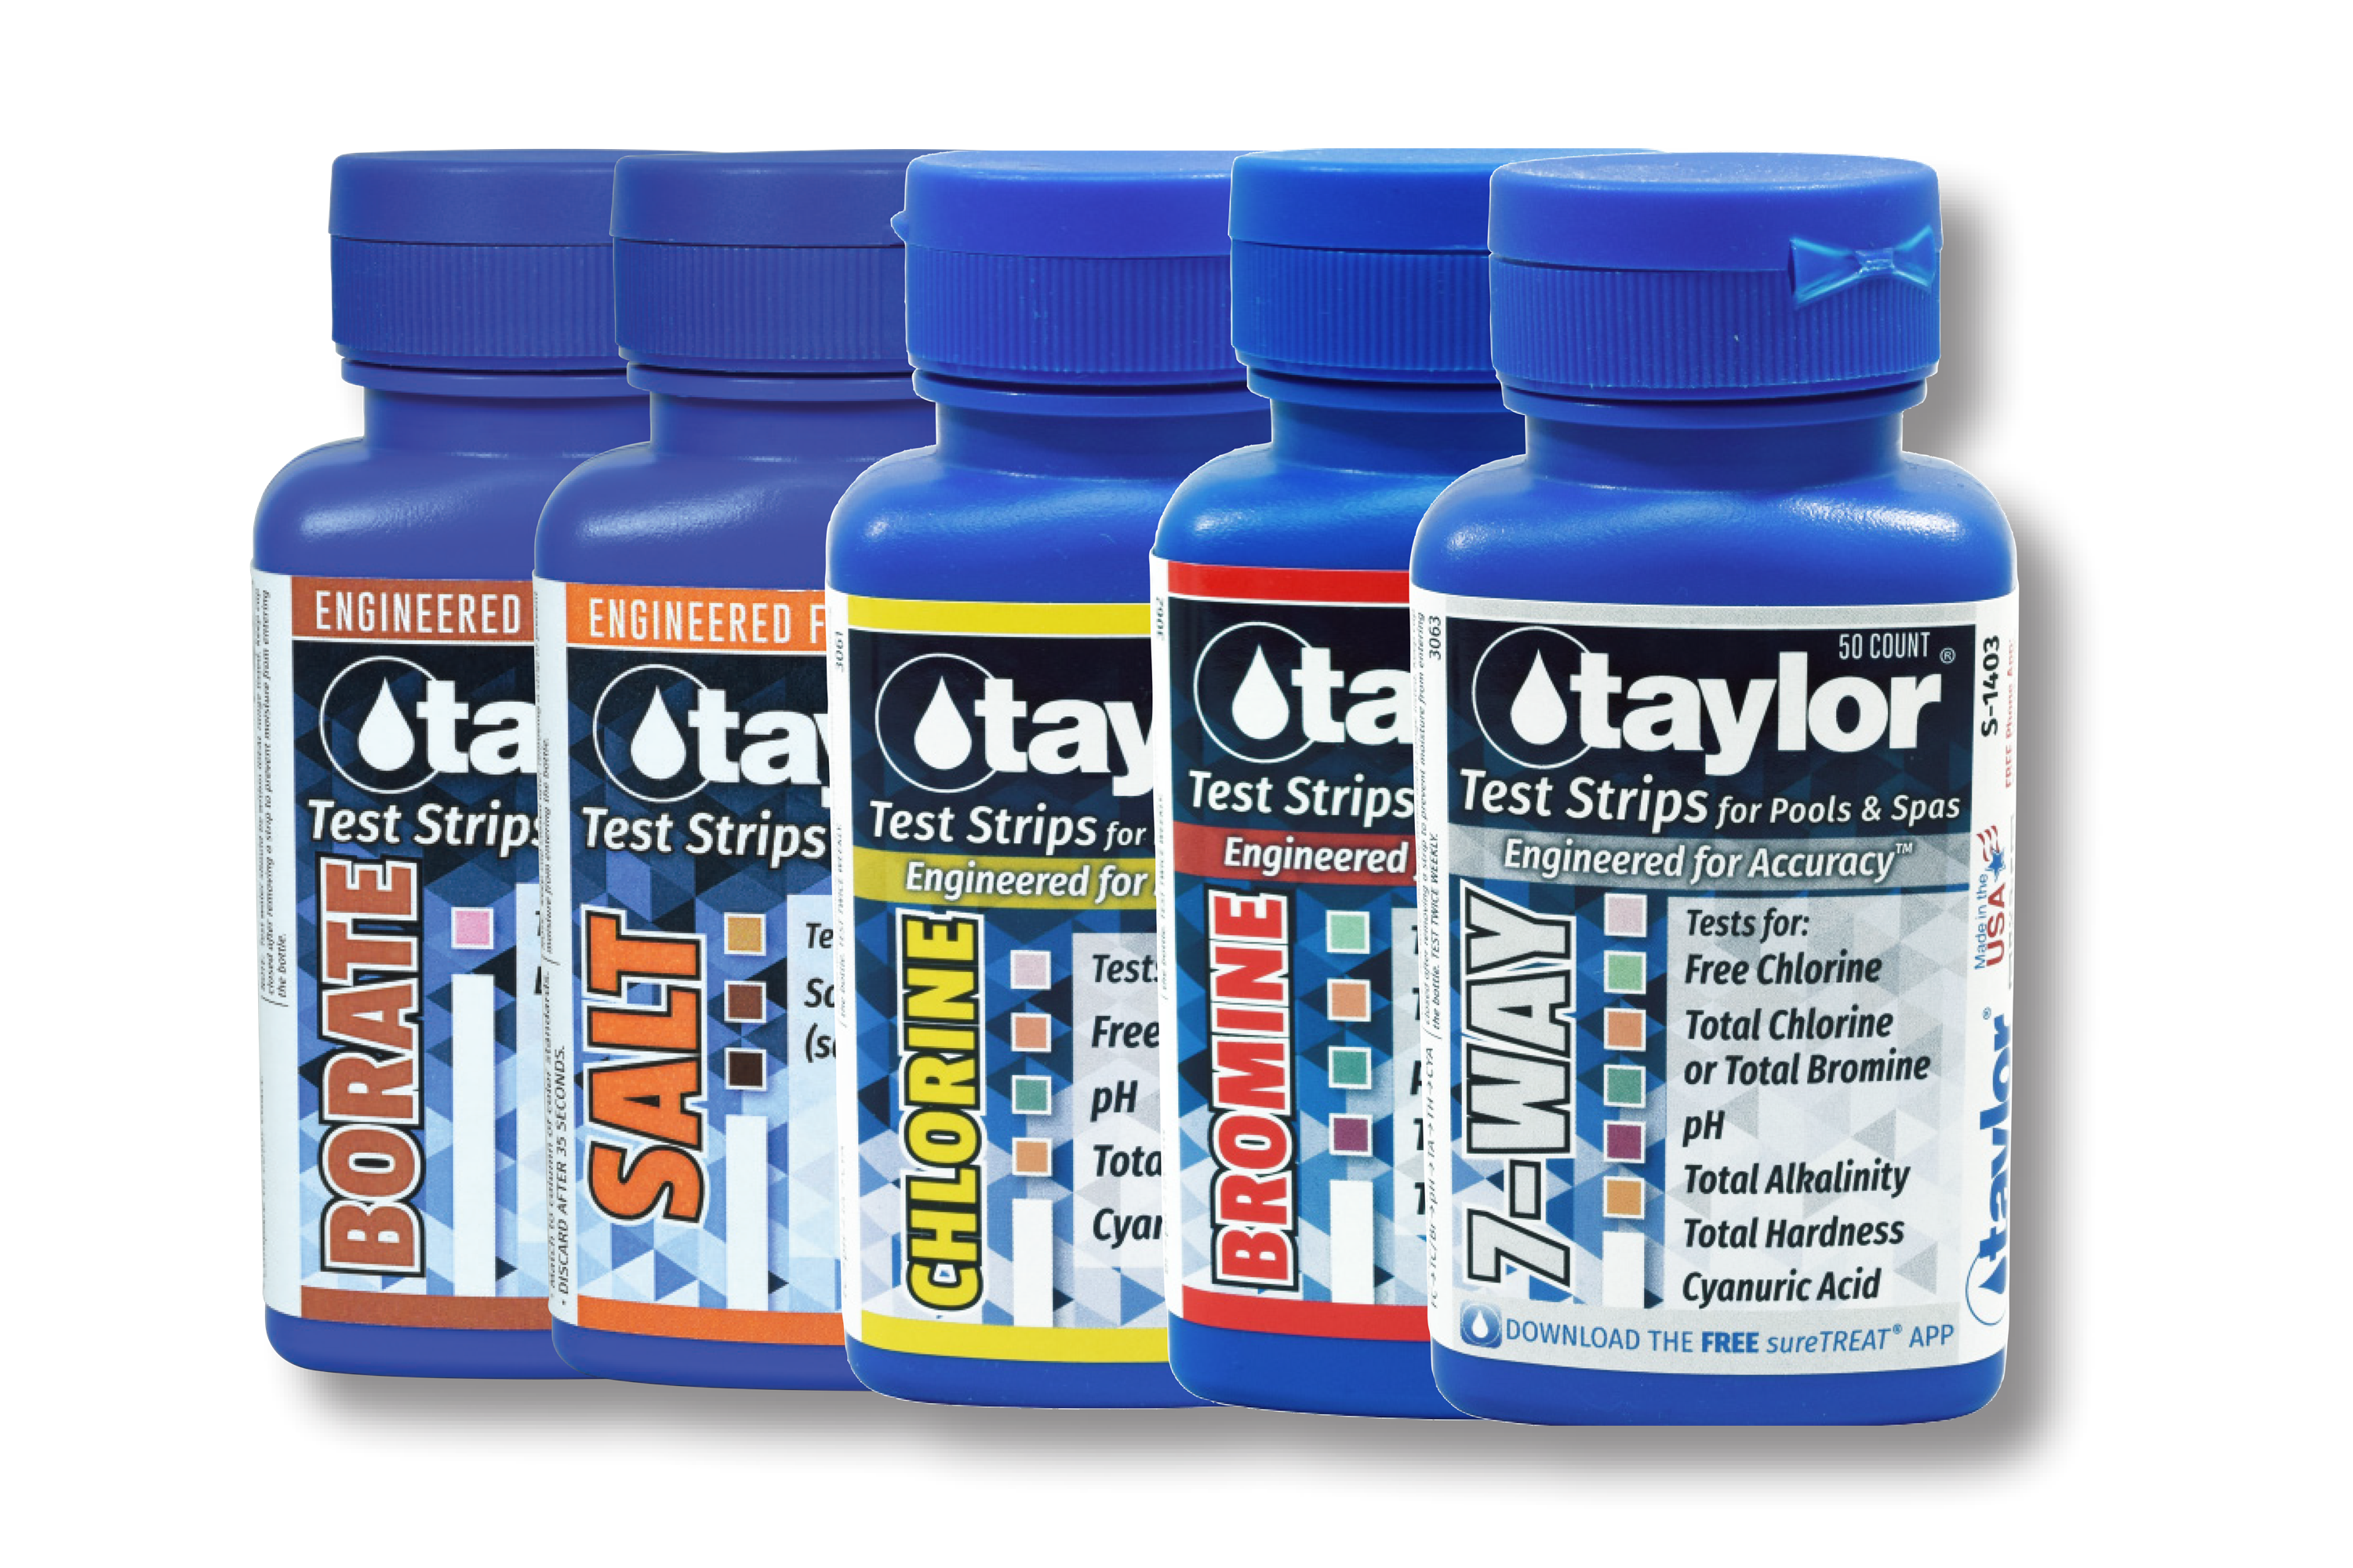 Taylor Test Strips: Four Things You Need to Know